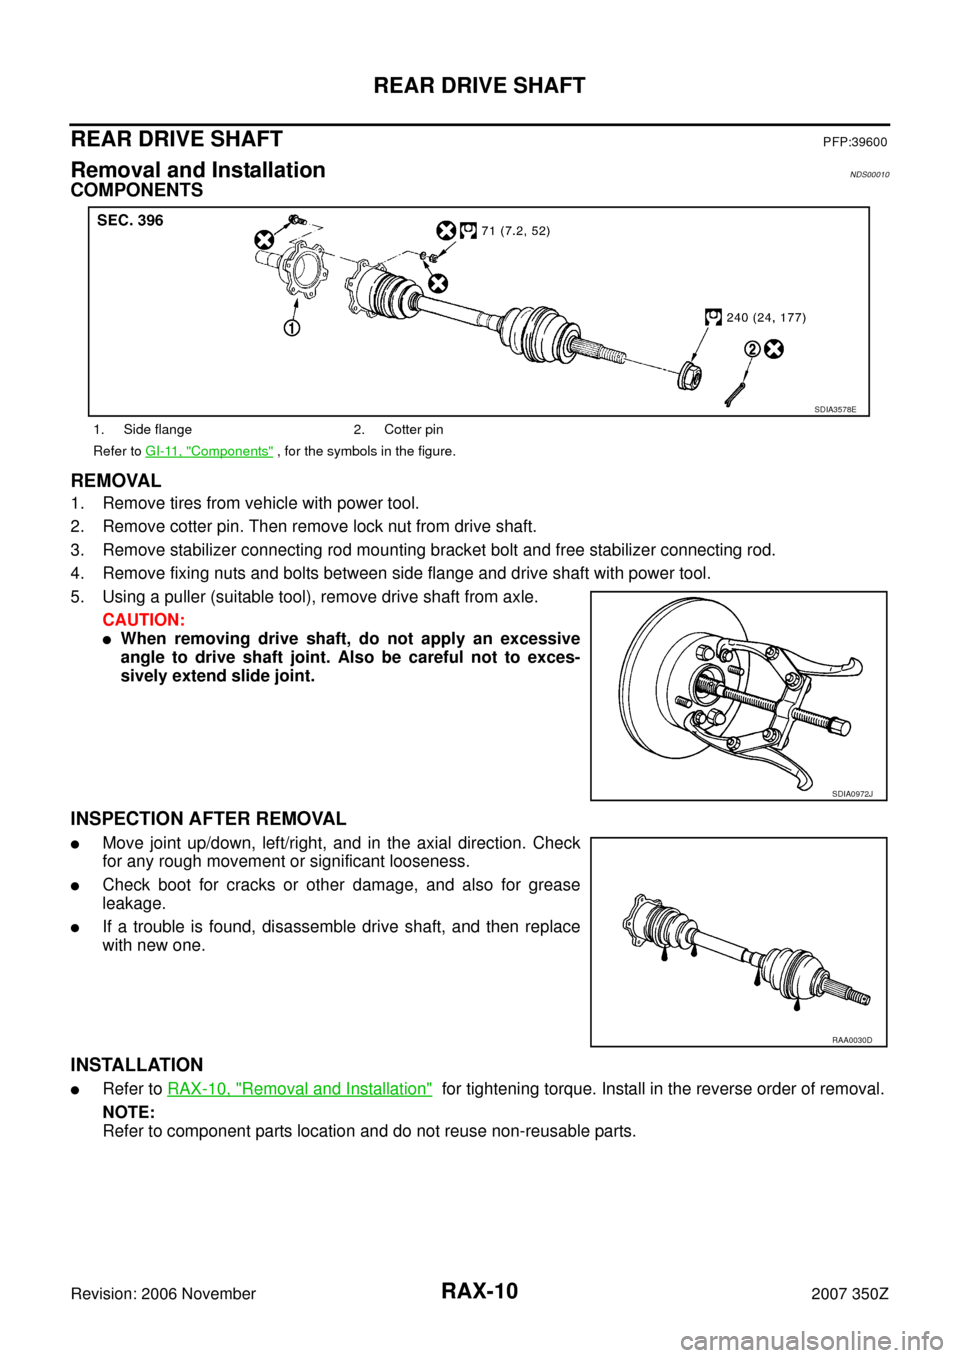 NISSAN 350Z 2007 Z33 Rear Axle Workshop Manual RAX-10
REAR DRIVE SHAFT
Revision: 2006 November2007 350Z
REAR DRIVE SHAFTPFP:39600
Removal and InstallationNDS00010
COMPONENTS
REMOVAL
1. Remove tires from vehicle with power tool.
2. Remove cotter pi